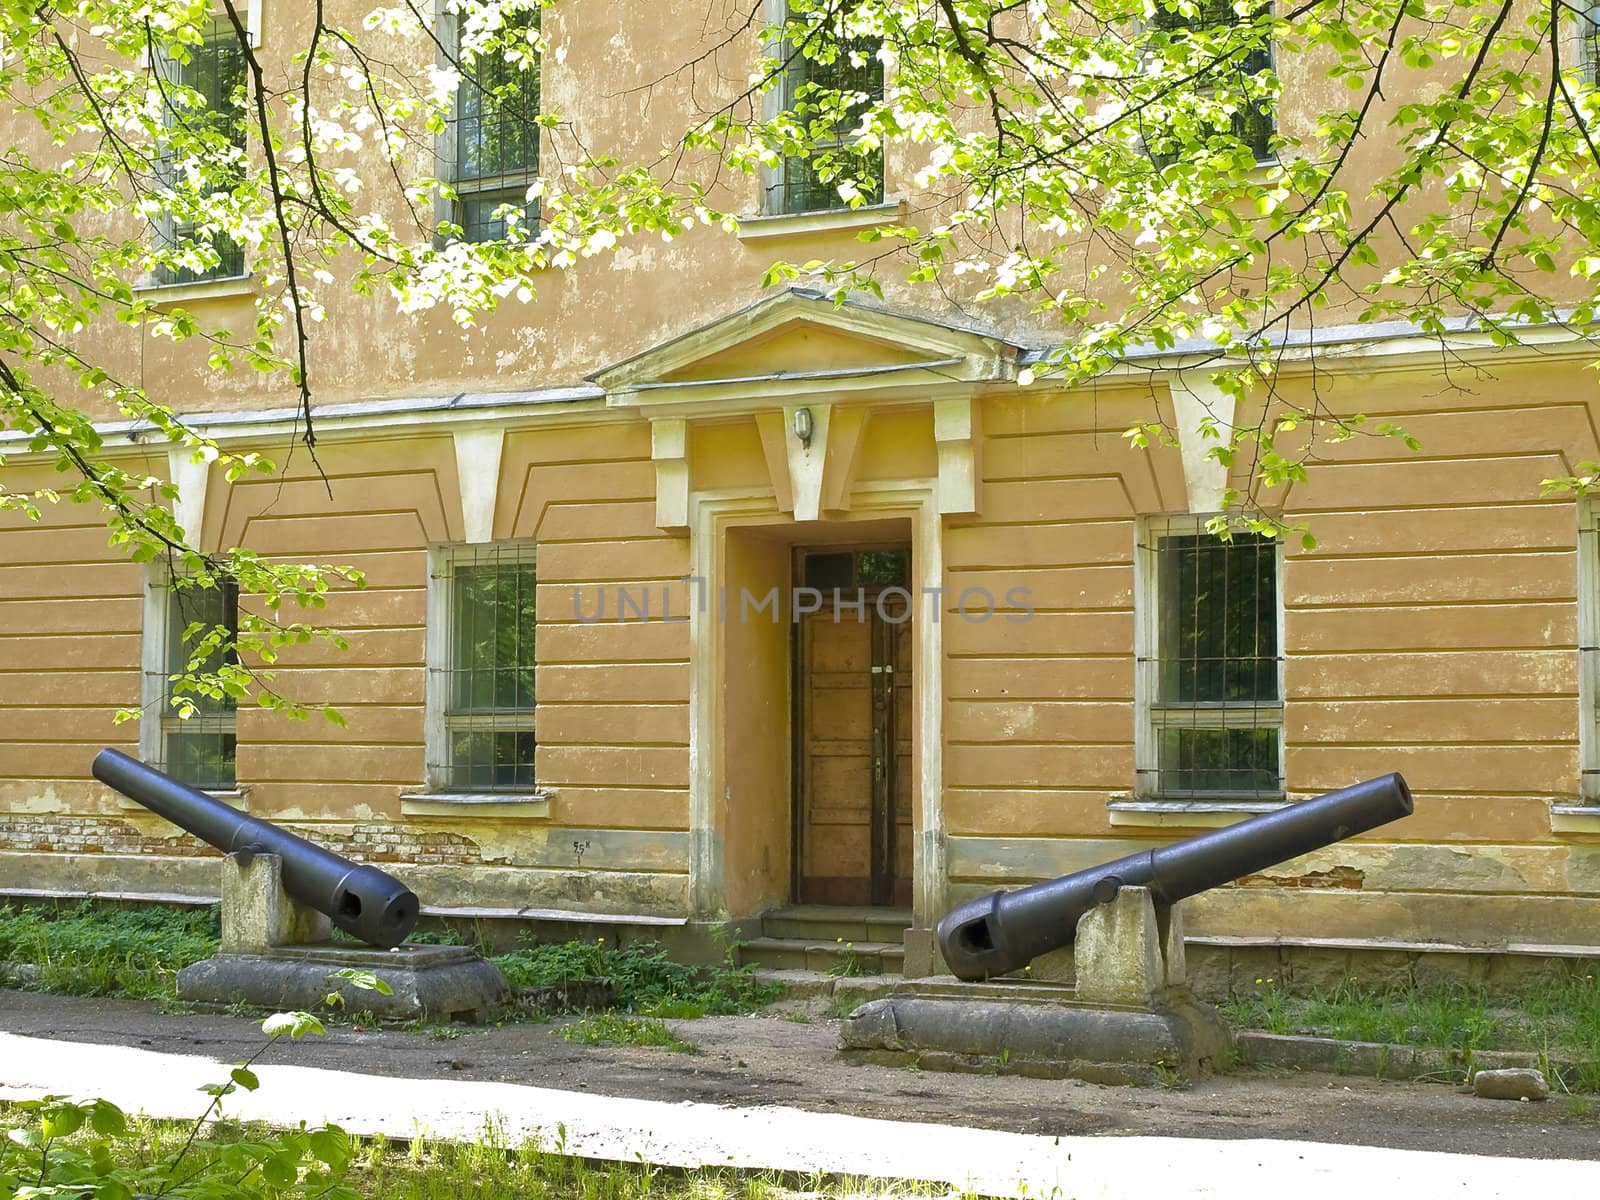 Entrance with canons in the old building